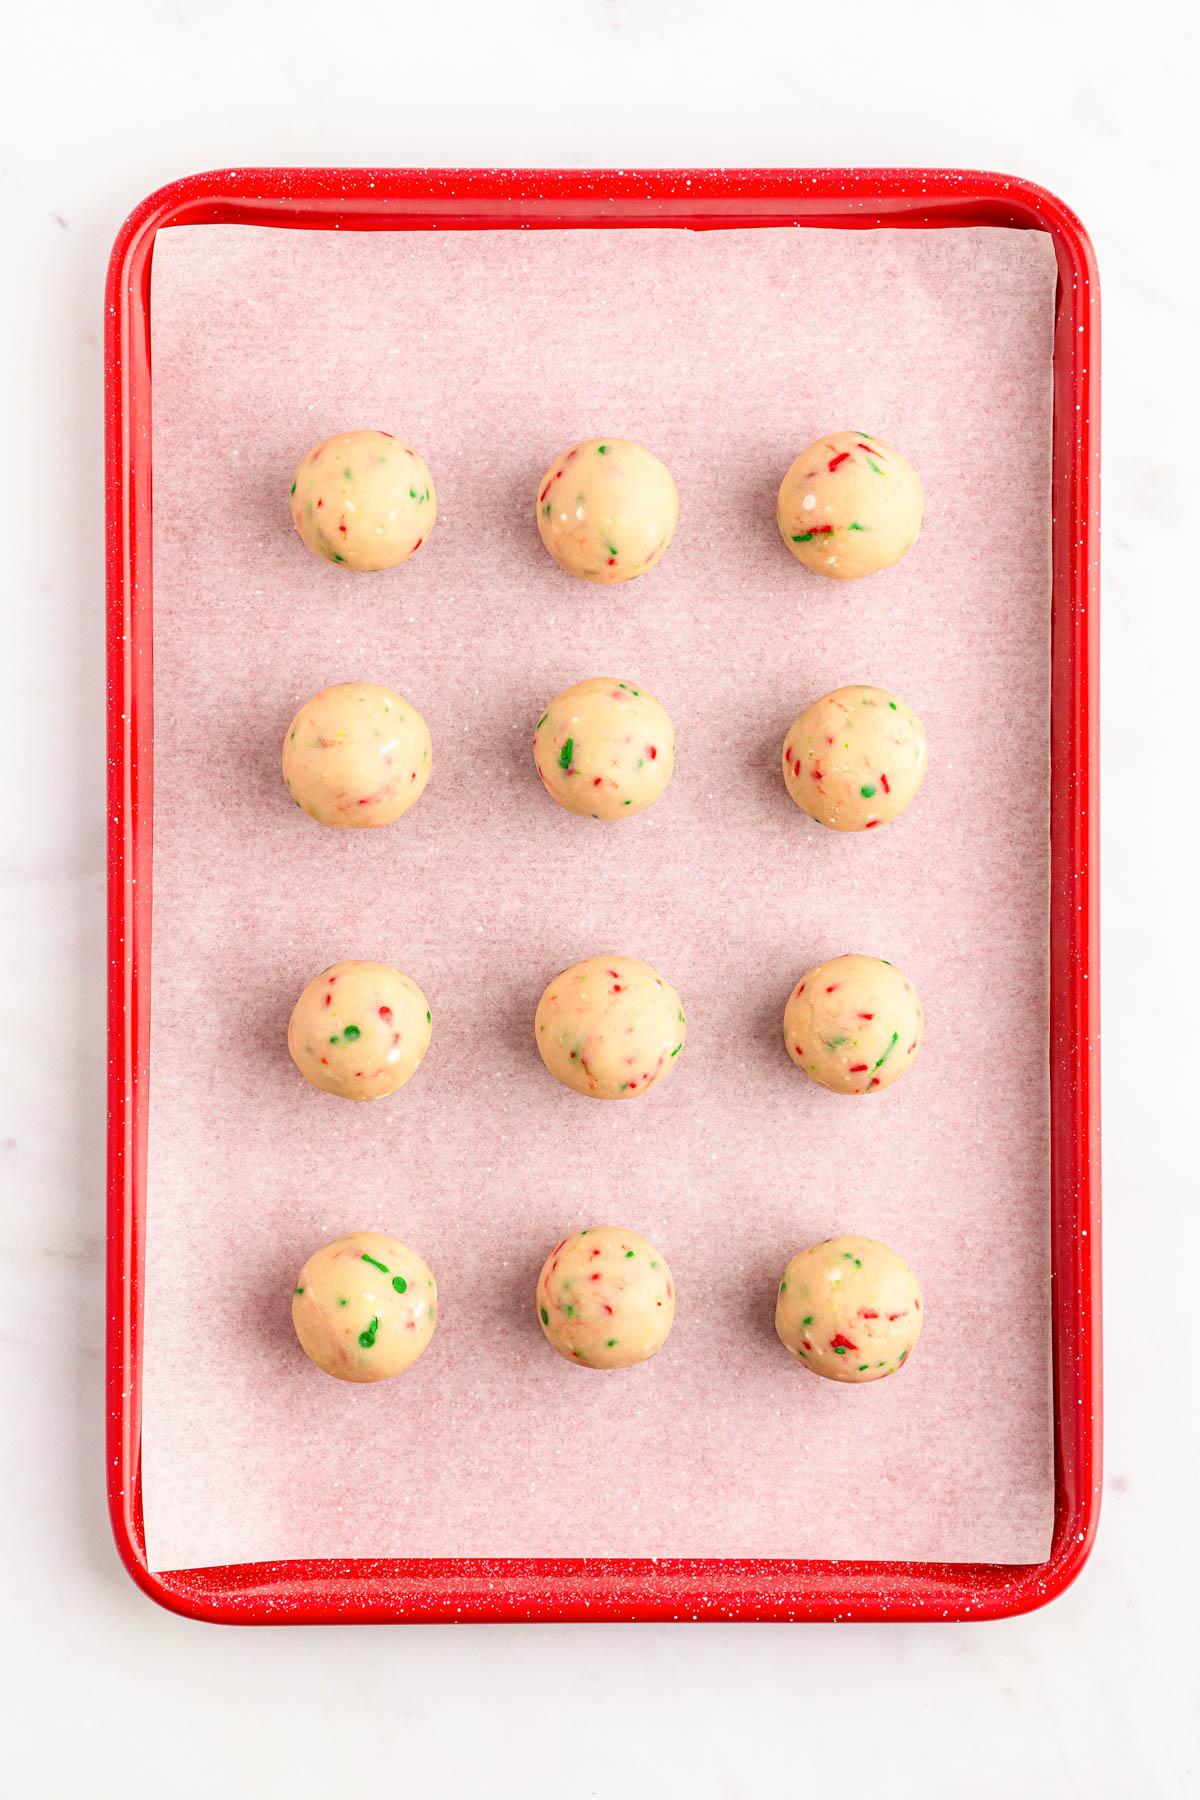 Sugar cookie truffle balls on a parchment lined baking sheet.